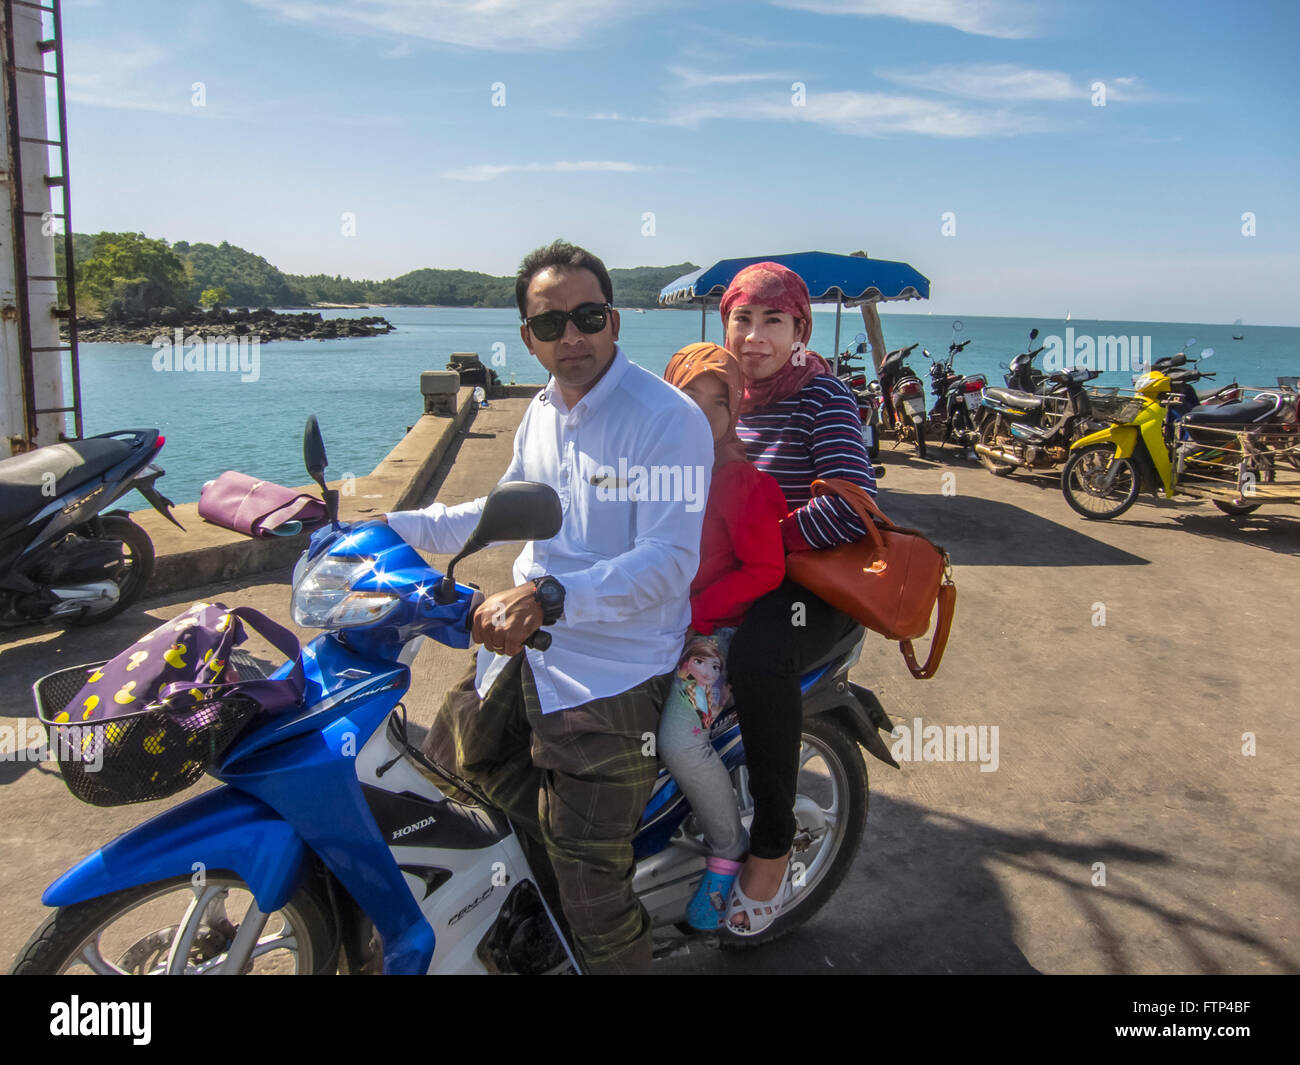 Local family, mum dad and daughter out on their motor bike. Koh Yao Yai island. Thailand Stock Photo